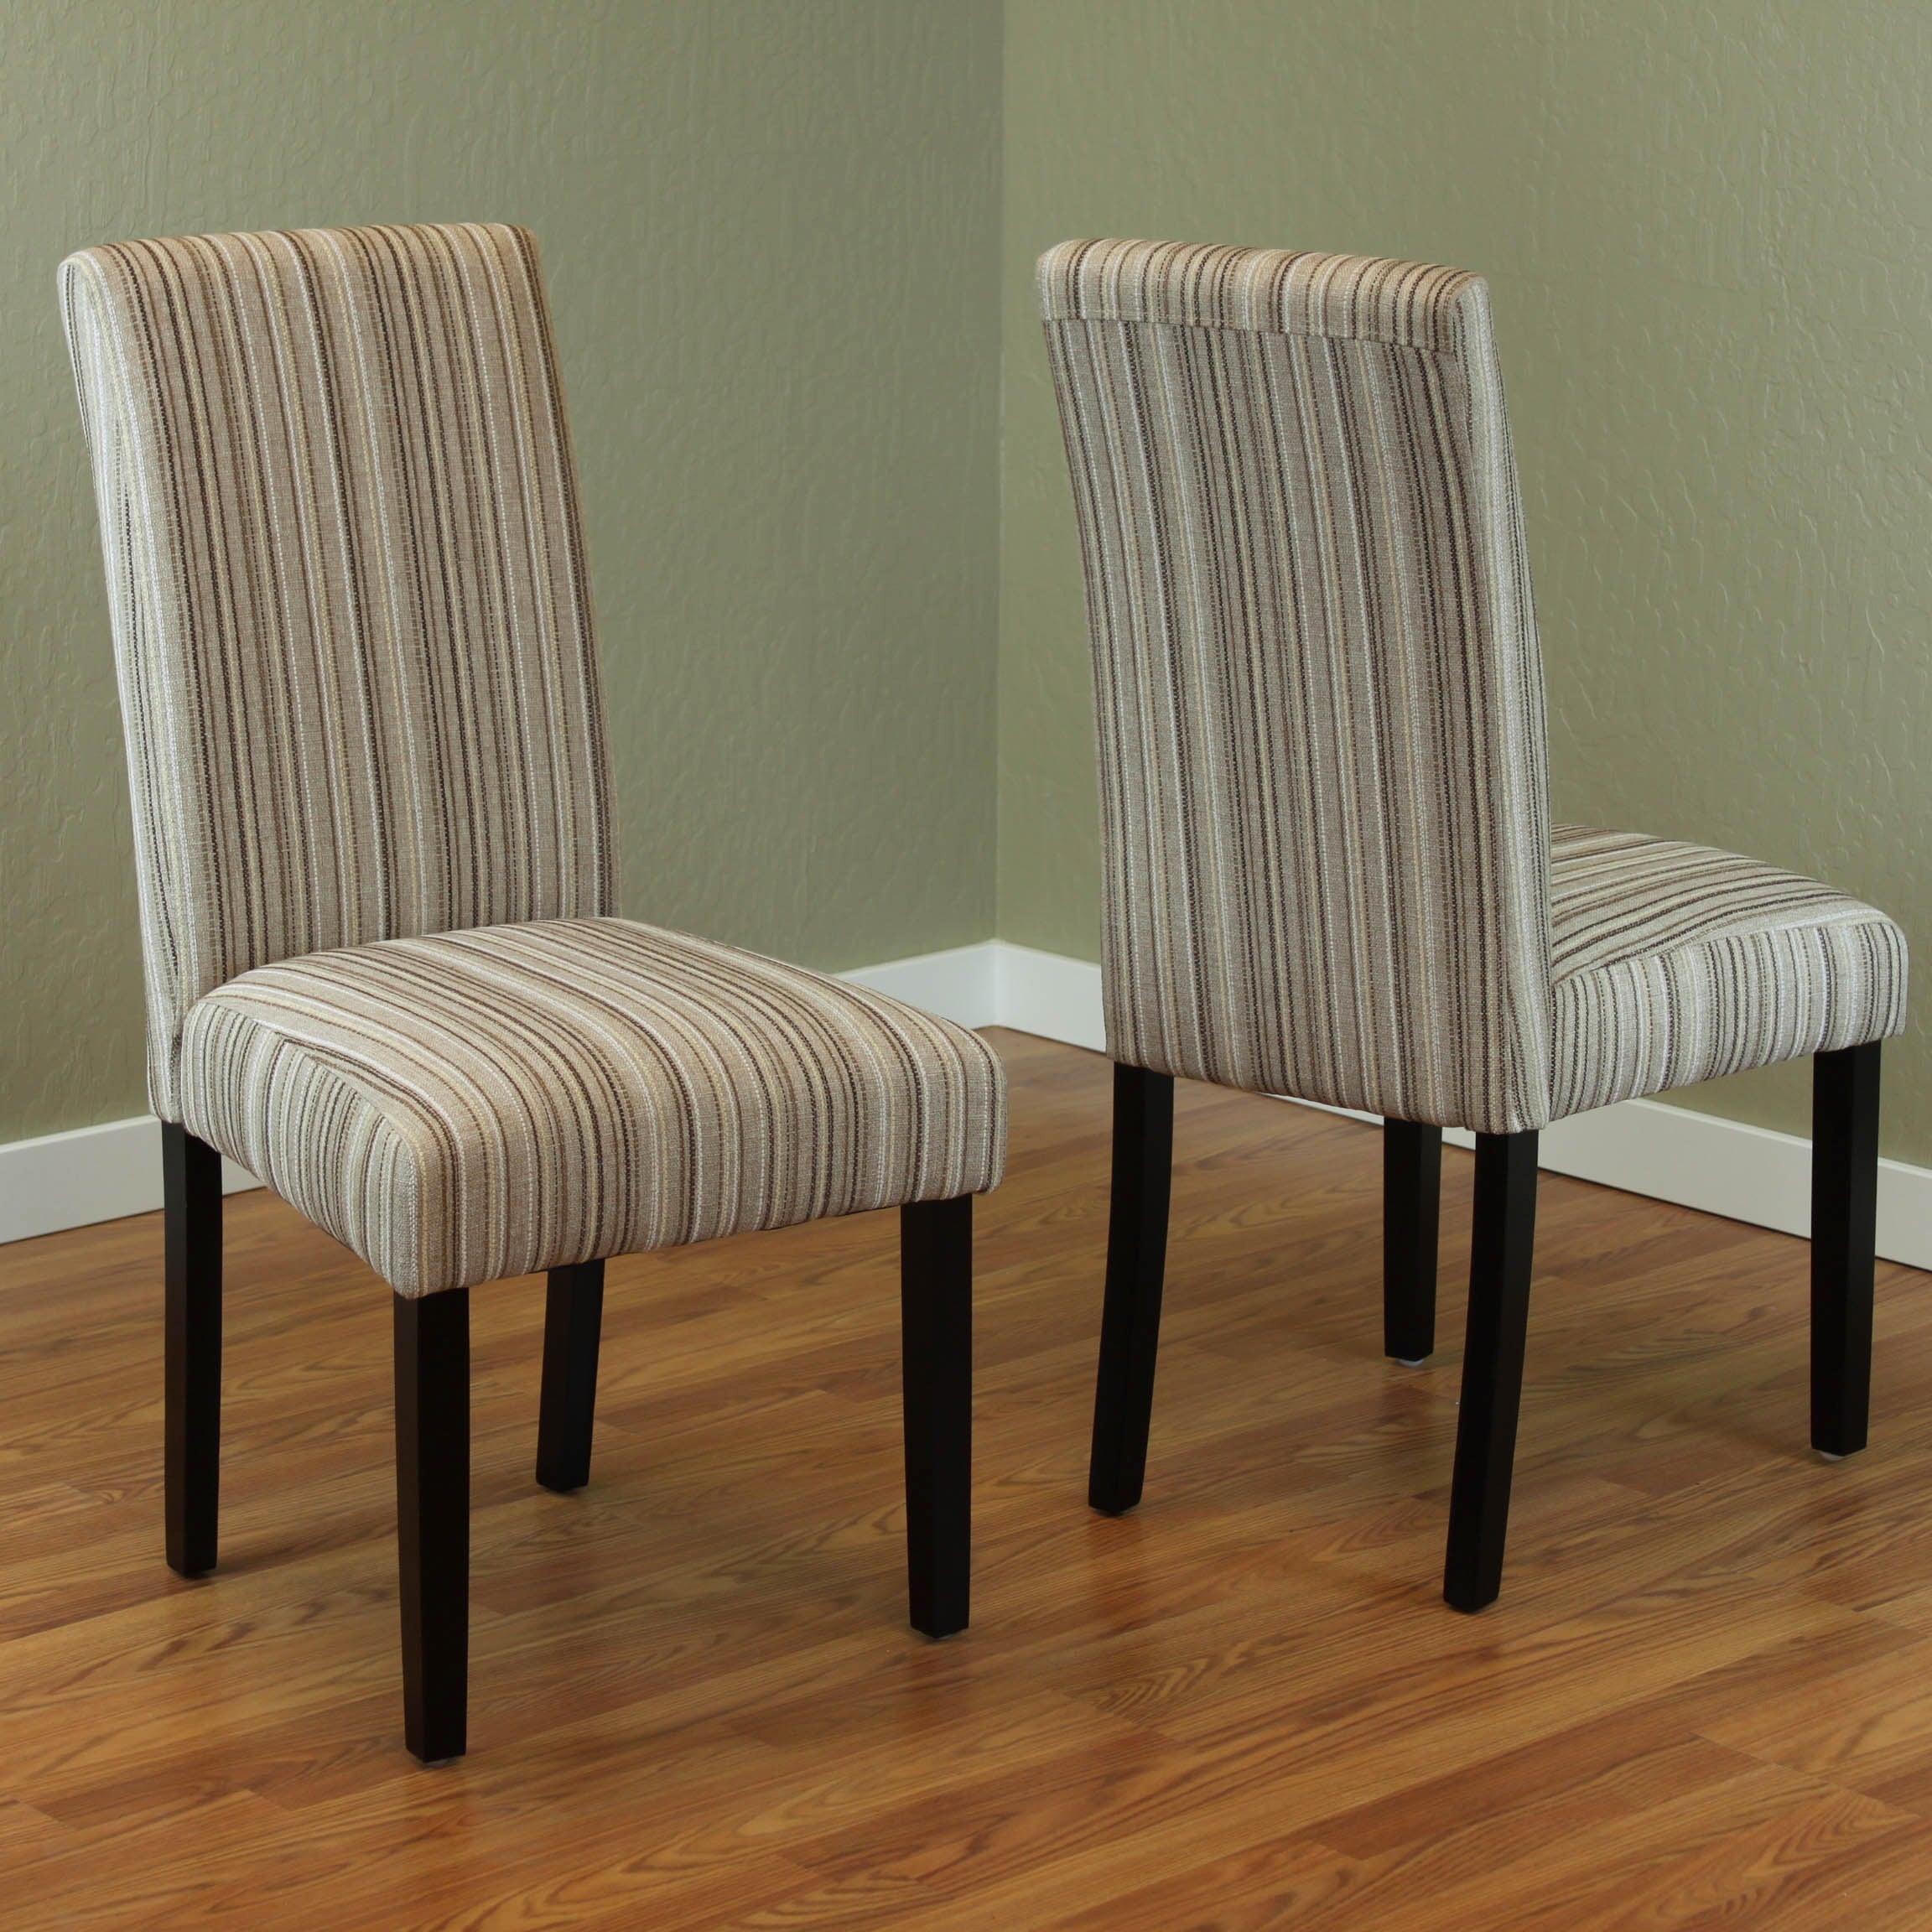 Seville Stripe Fabric Dining Chairs (Set of 2)